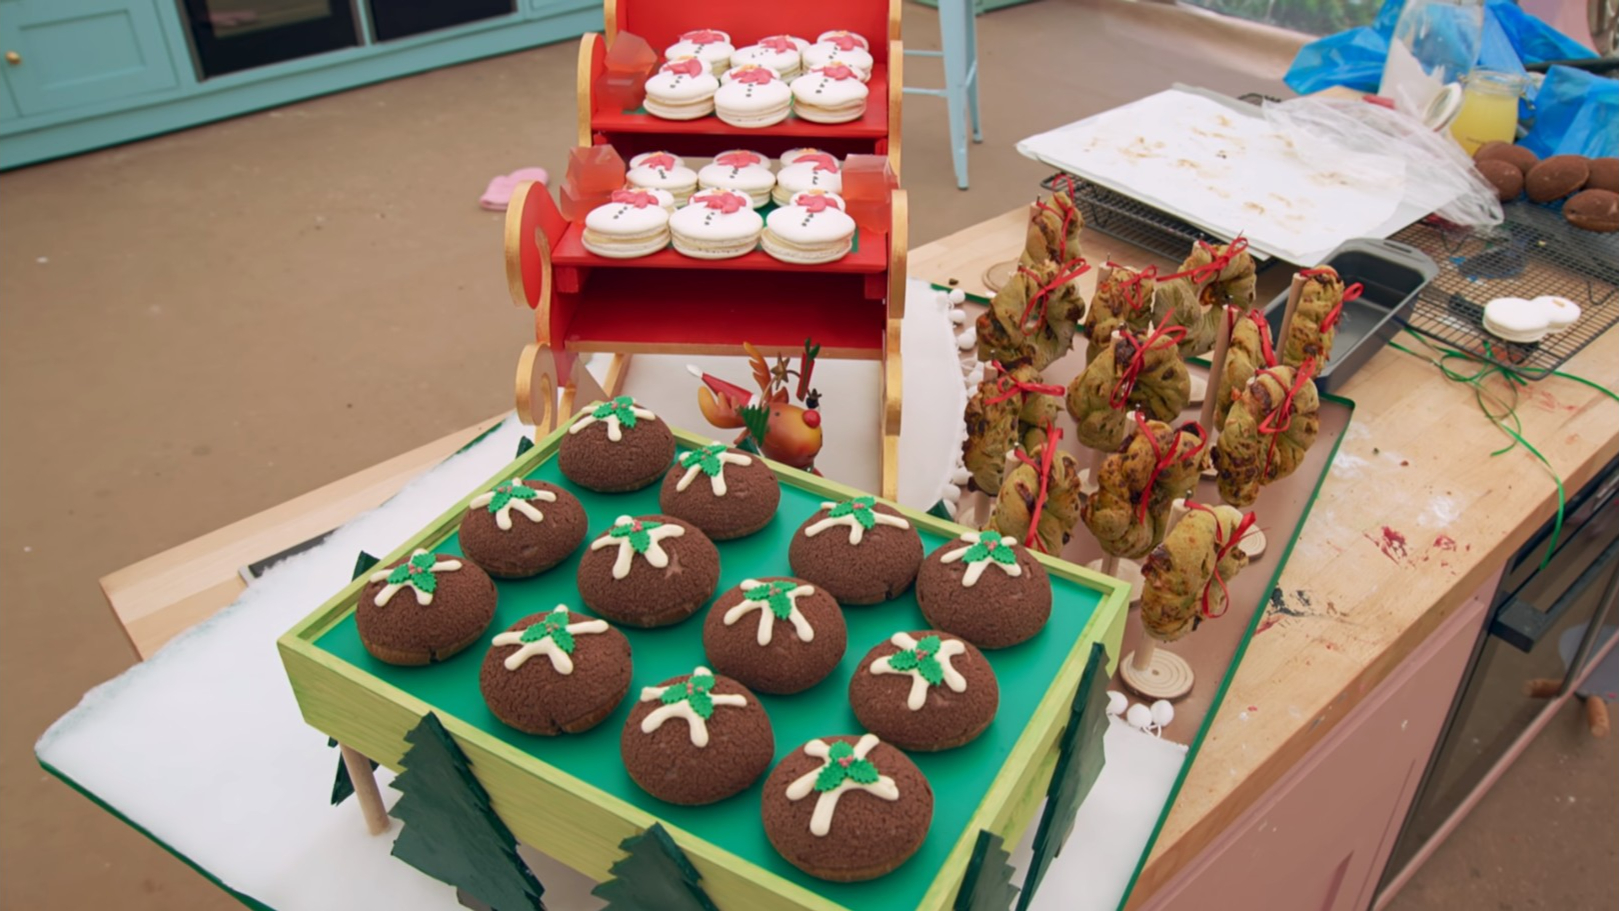 Josh's It’s Christmas!!! Buffet Showstopper from 'The Great British Baking Show' Season 14's "Party Week"